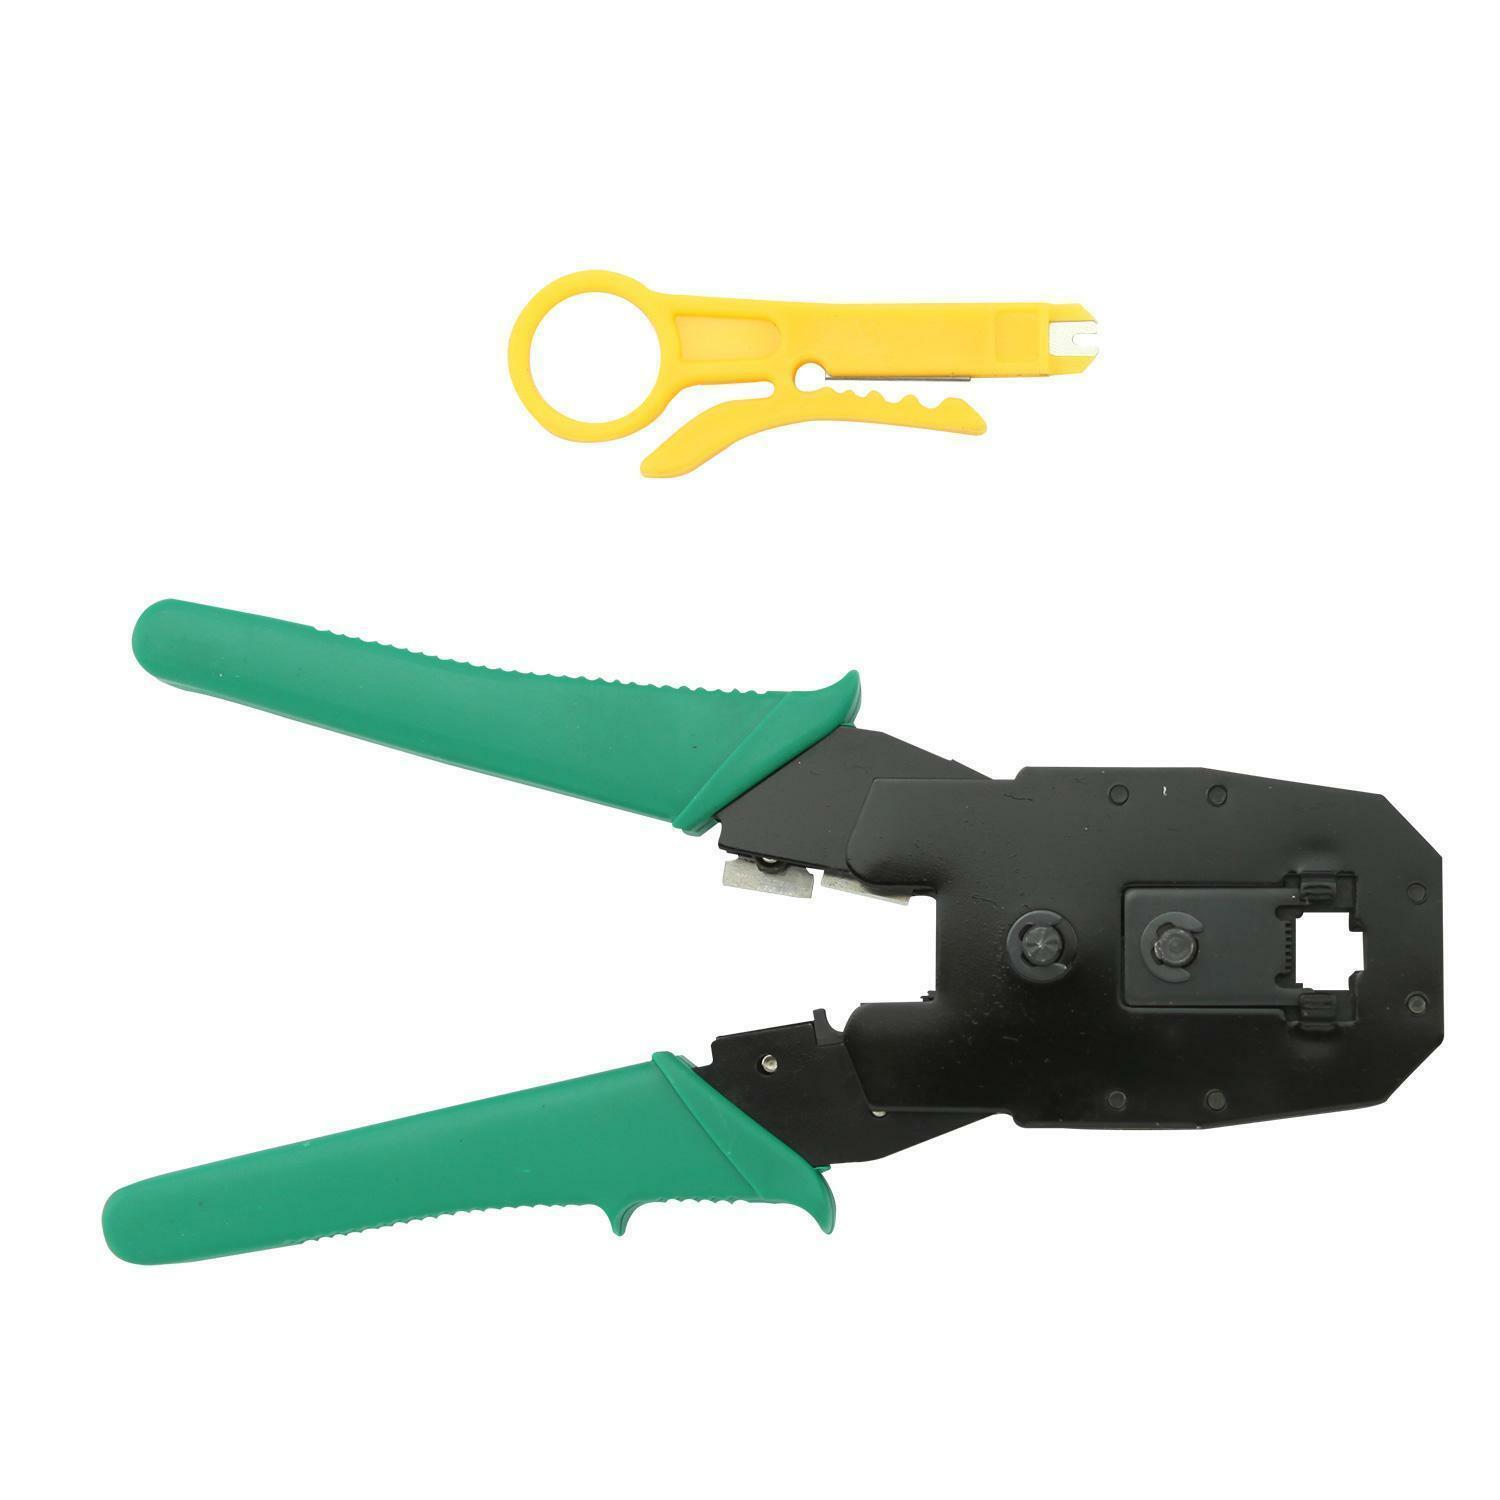 New Rj45 Network Cable Crimper Crimping Pliers Cat5 Ethernet Lan Network Tool